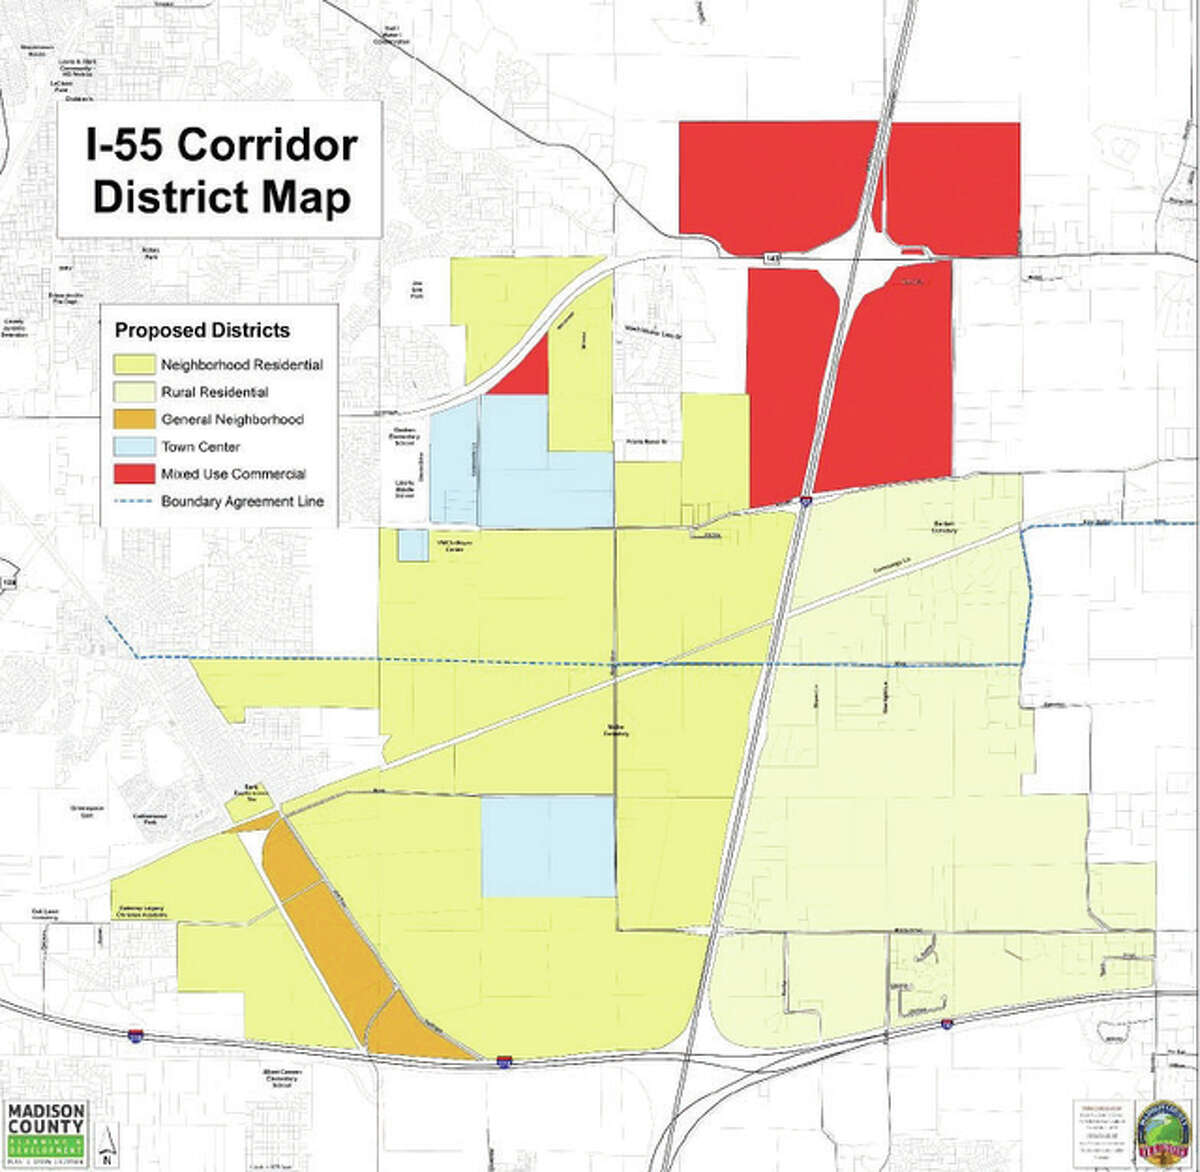 The I-55 Corridor map outlines areas for residential, town center and mixed-use commercial districts.